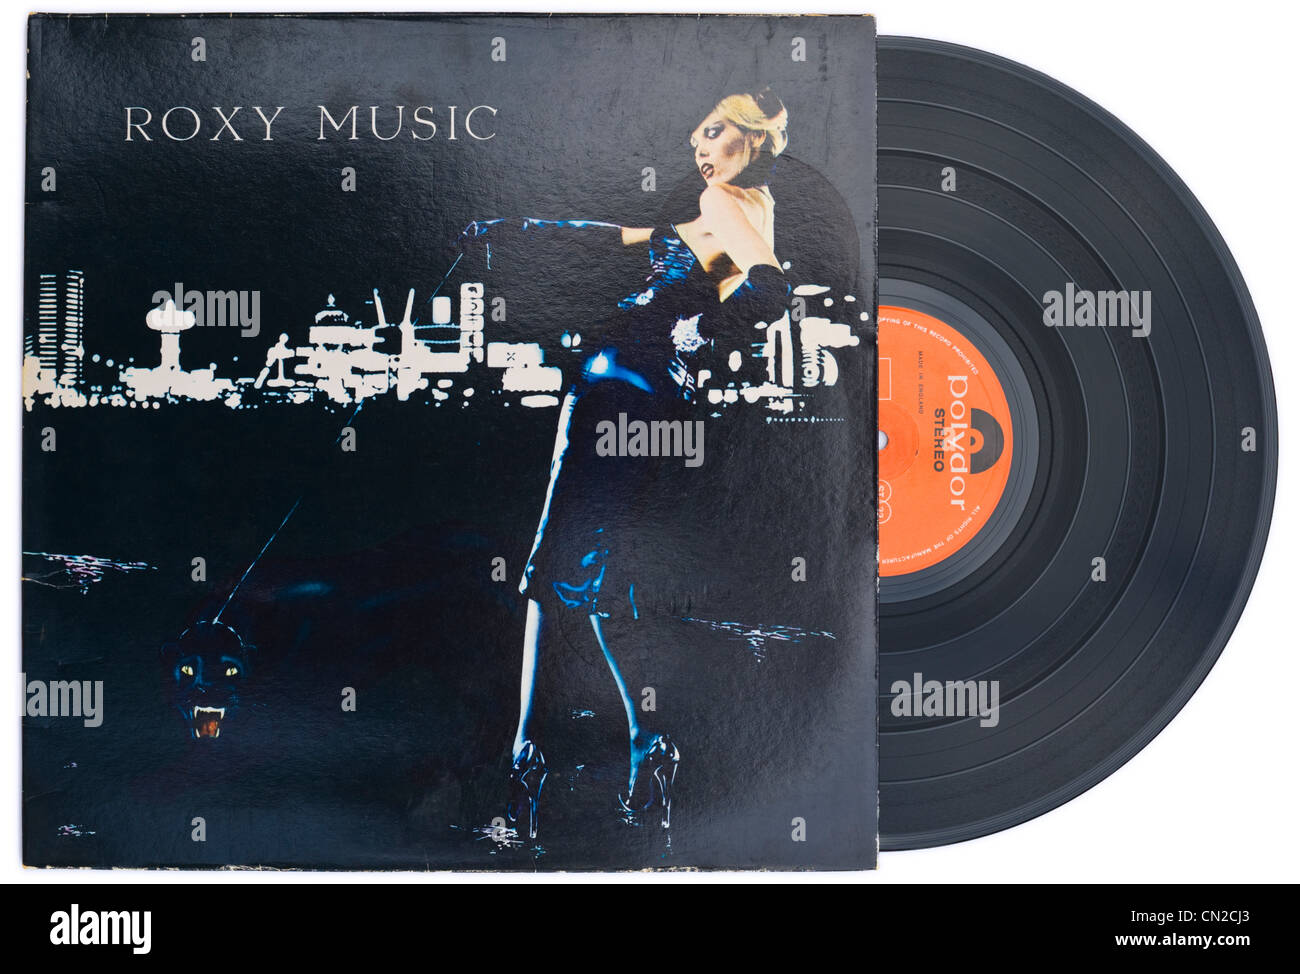 British rock band ROXY MUSIC classic vinyl album and cover FOR YOUR PLEASURE released 1973 on POLYDOR RECORDS label Stock Photo